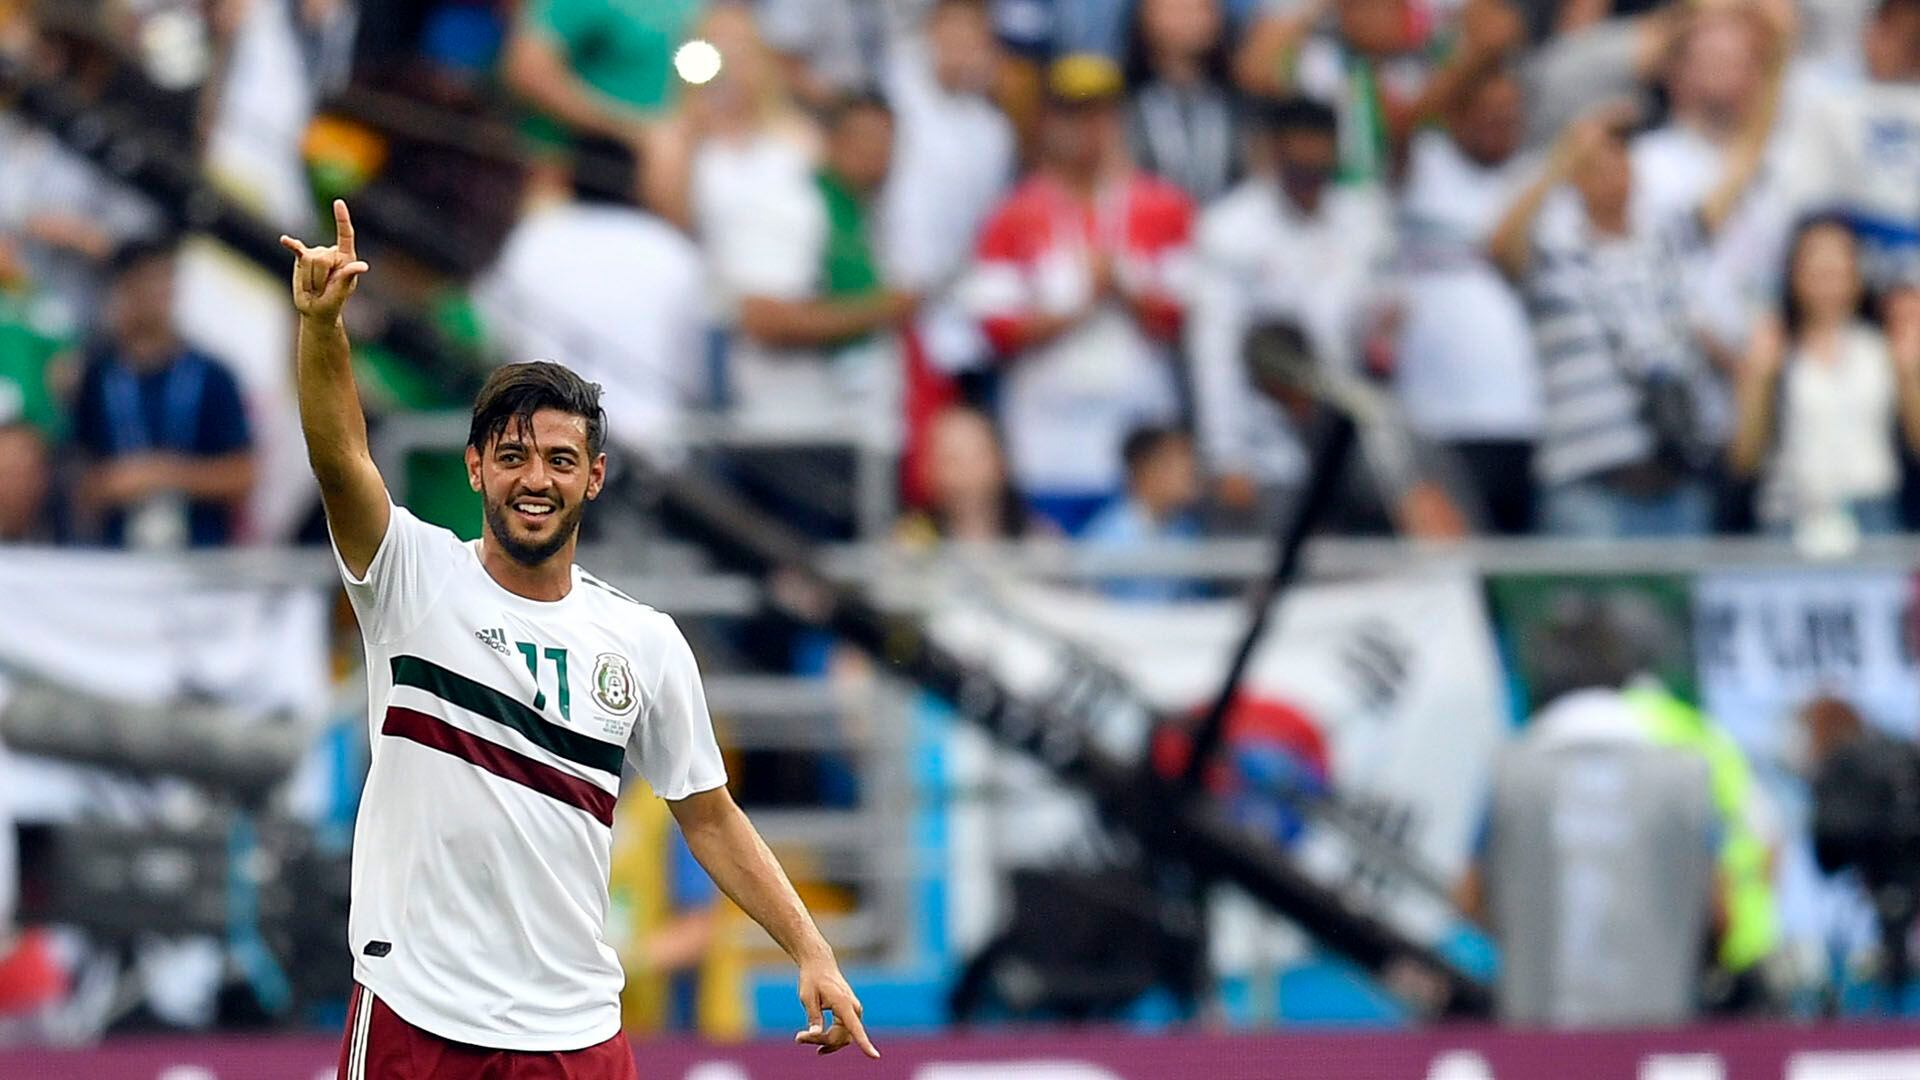 Mexico's Carlos Vela celebrates after scoring his side's opening goal from a penalty kick during the group F match between Mexico and South Korea at the 2018 soccer World Cup in the Rostov Arena in Rostov-on-Don, Russia, Saturday, June 23, 2018. (AP Photo/Martin Meissner)